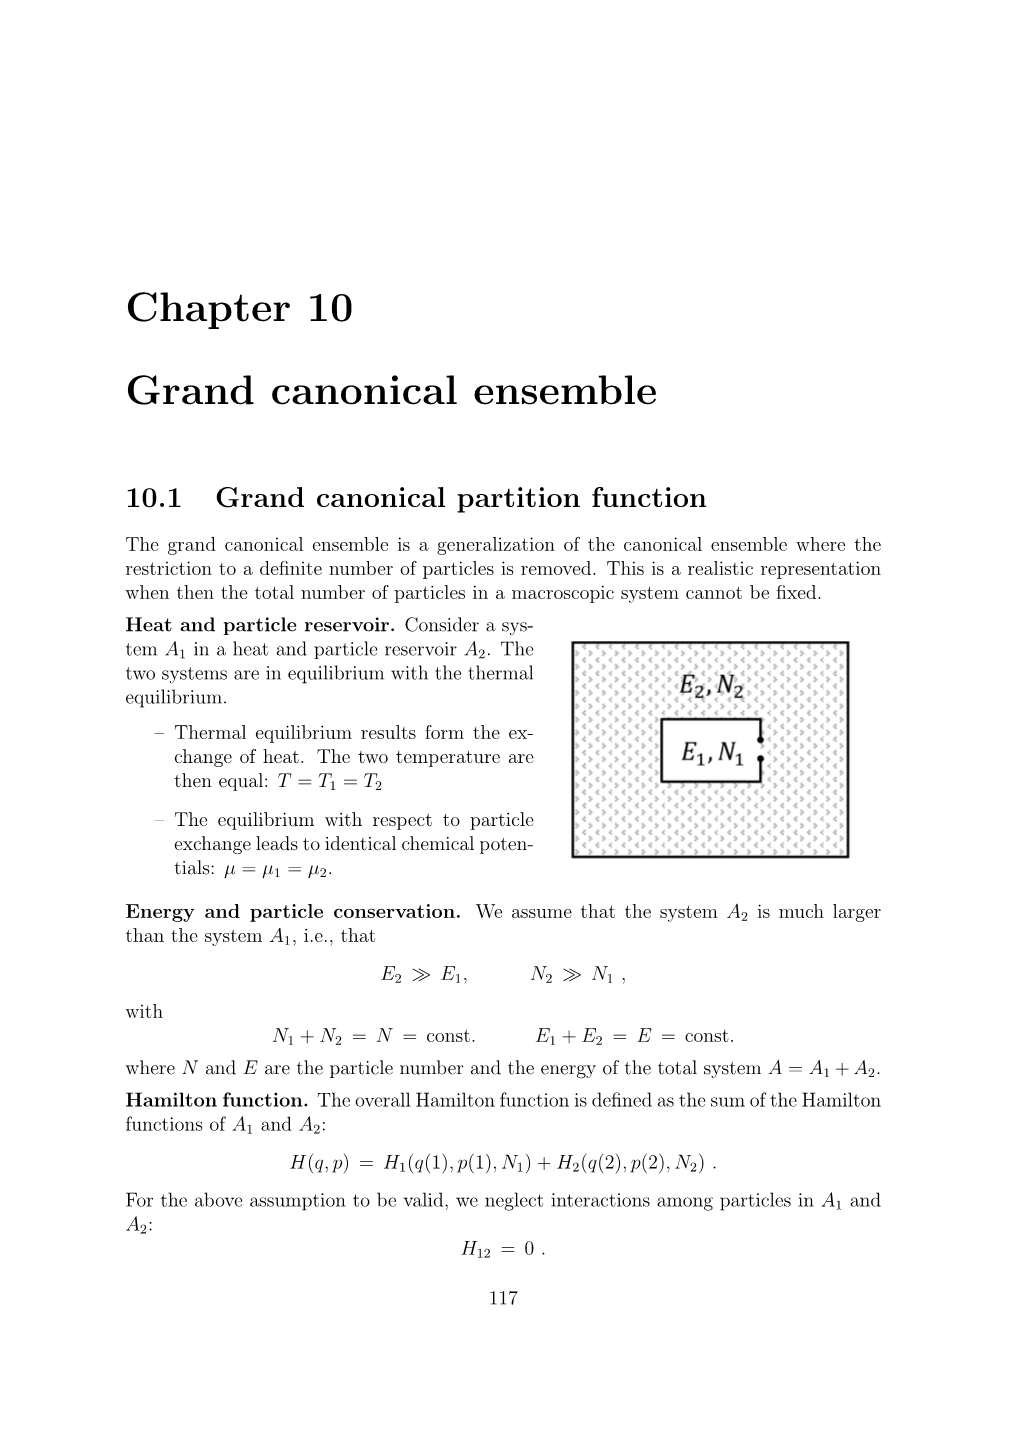 Chapter 10 Grand Canonical Ensemble